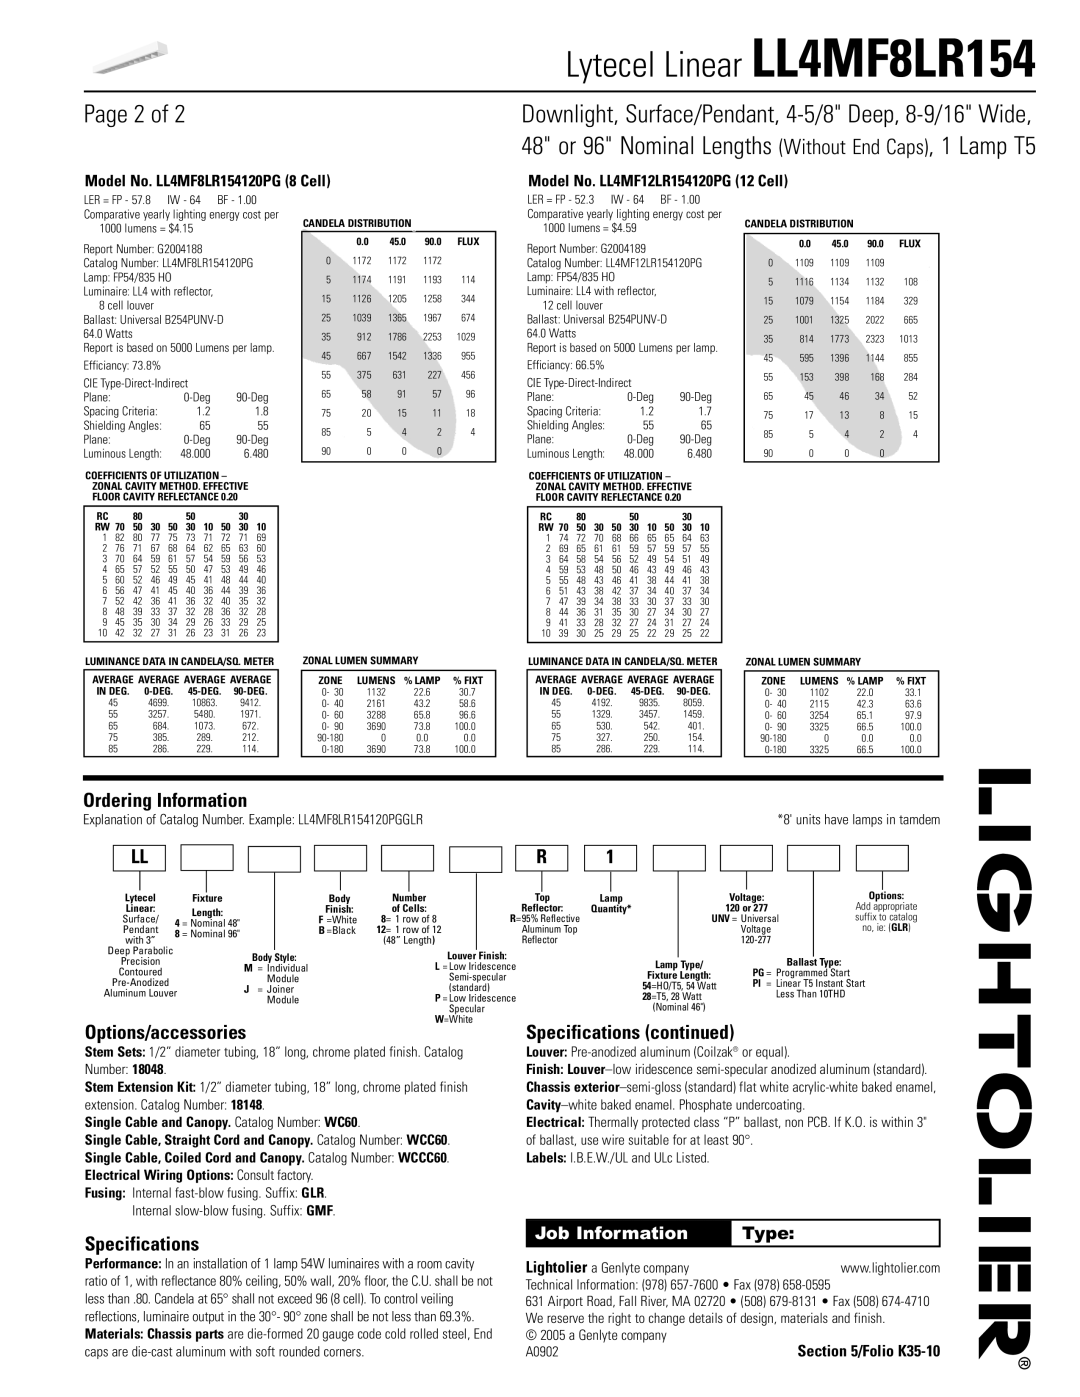 Lightolier Page 2 of, Ordering Information, Options/accessories, Specifications, Lytecel Linear LL4MF8LR154, Type 